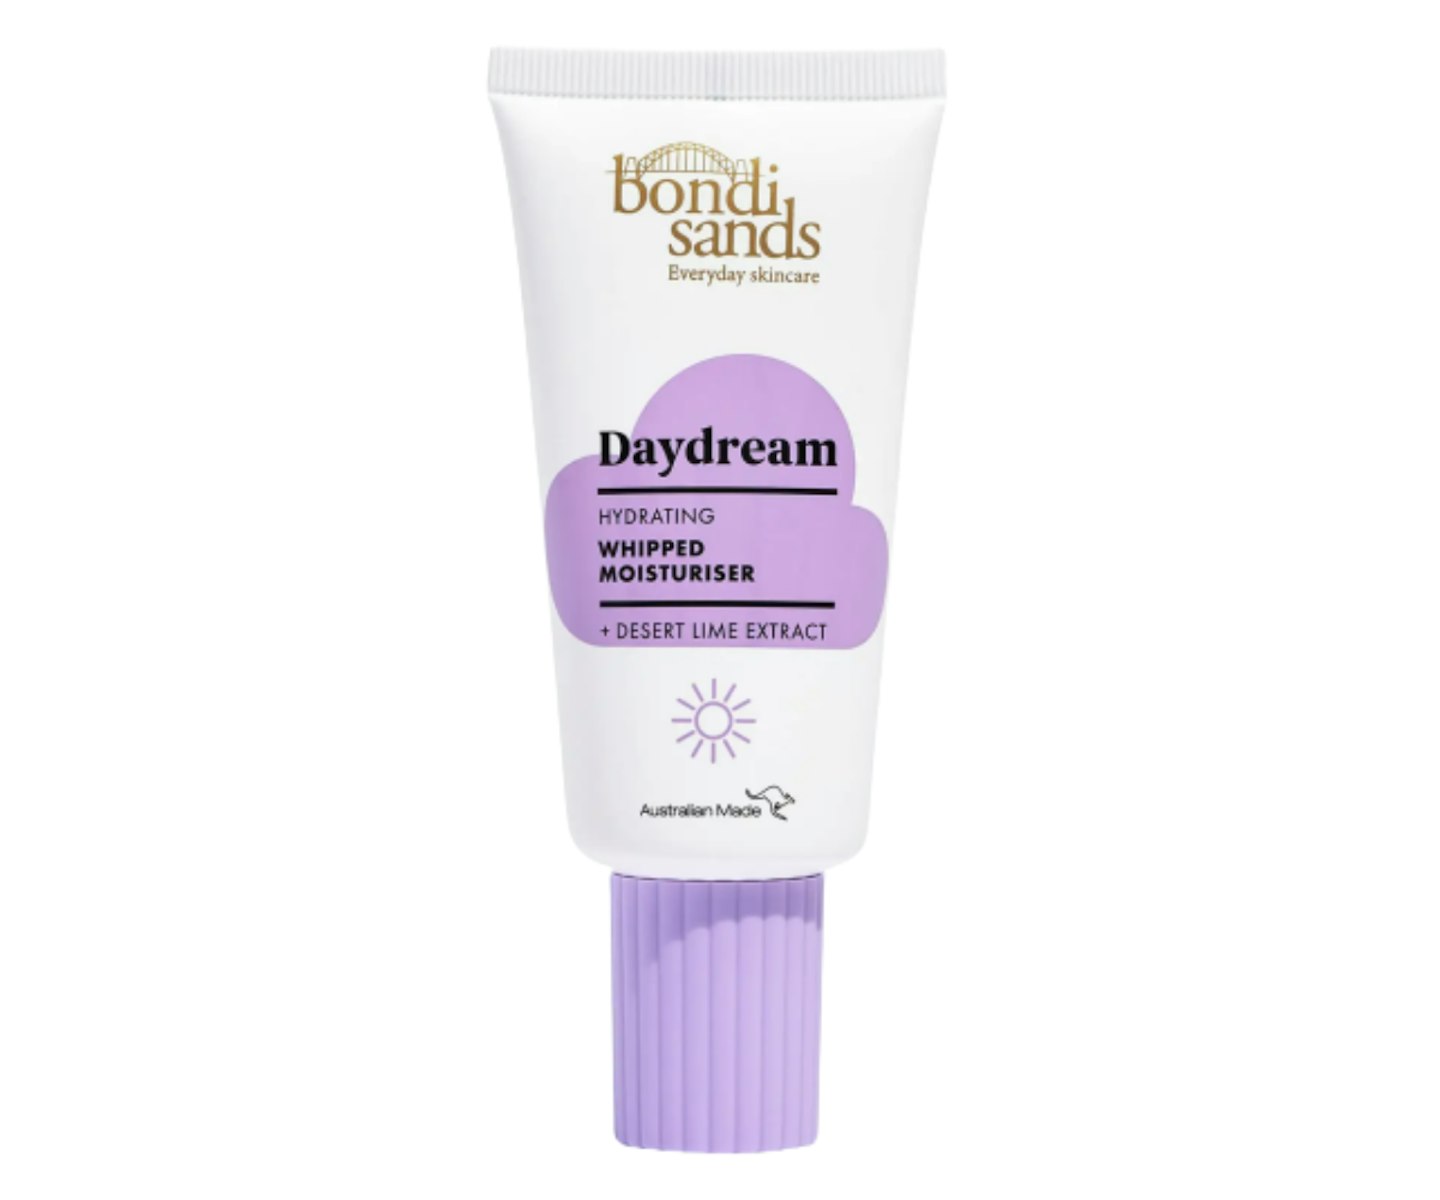 A picture of the Bondi Sands Daydream Whipped Moisturiser